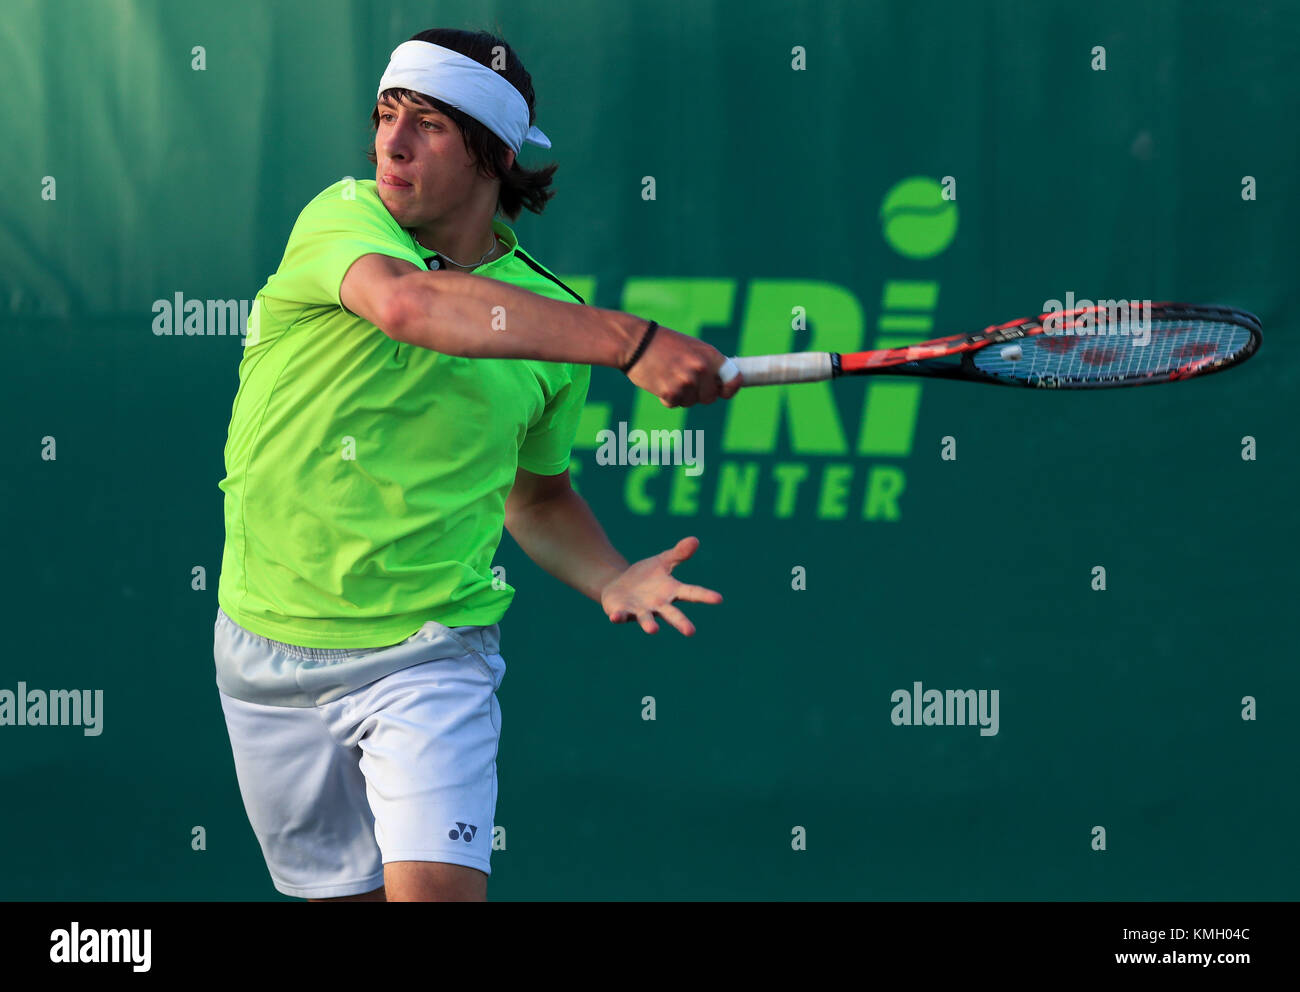 Plantation, Florida, USA. 07th Dec, 2017. Justin SCHLAGETER (GER) plays in the 2017 Orange Bowl International Tennis Championship elimination rounds of Boys 18s and under, played at the Frank Veltri Tennis Center in Plantation, Florida, USA. Mario Houben/CSM/Alamy Live News Stock Photo